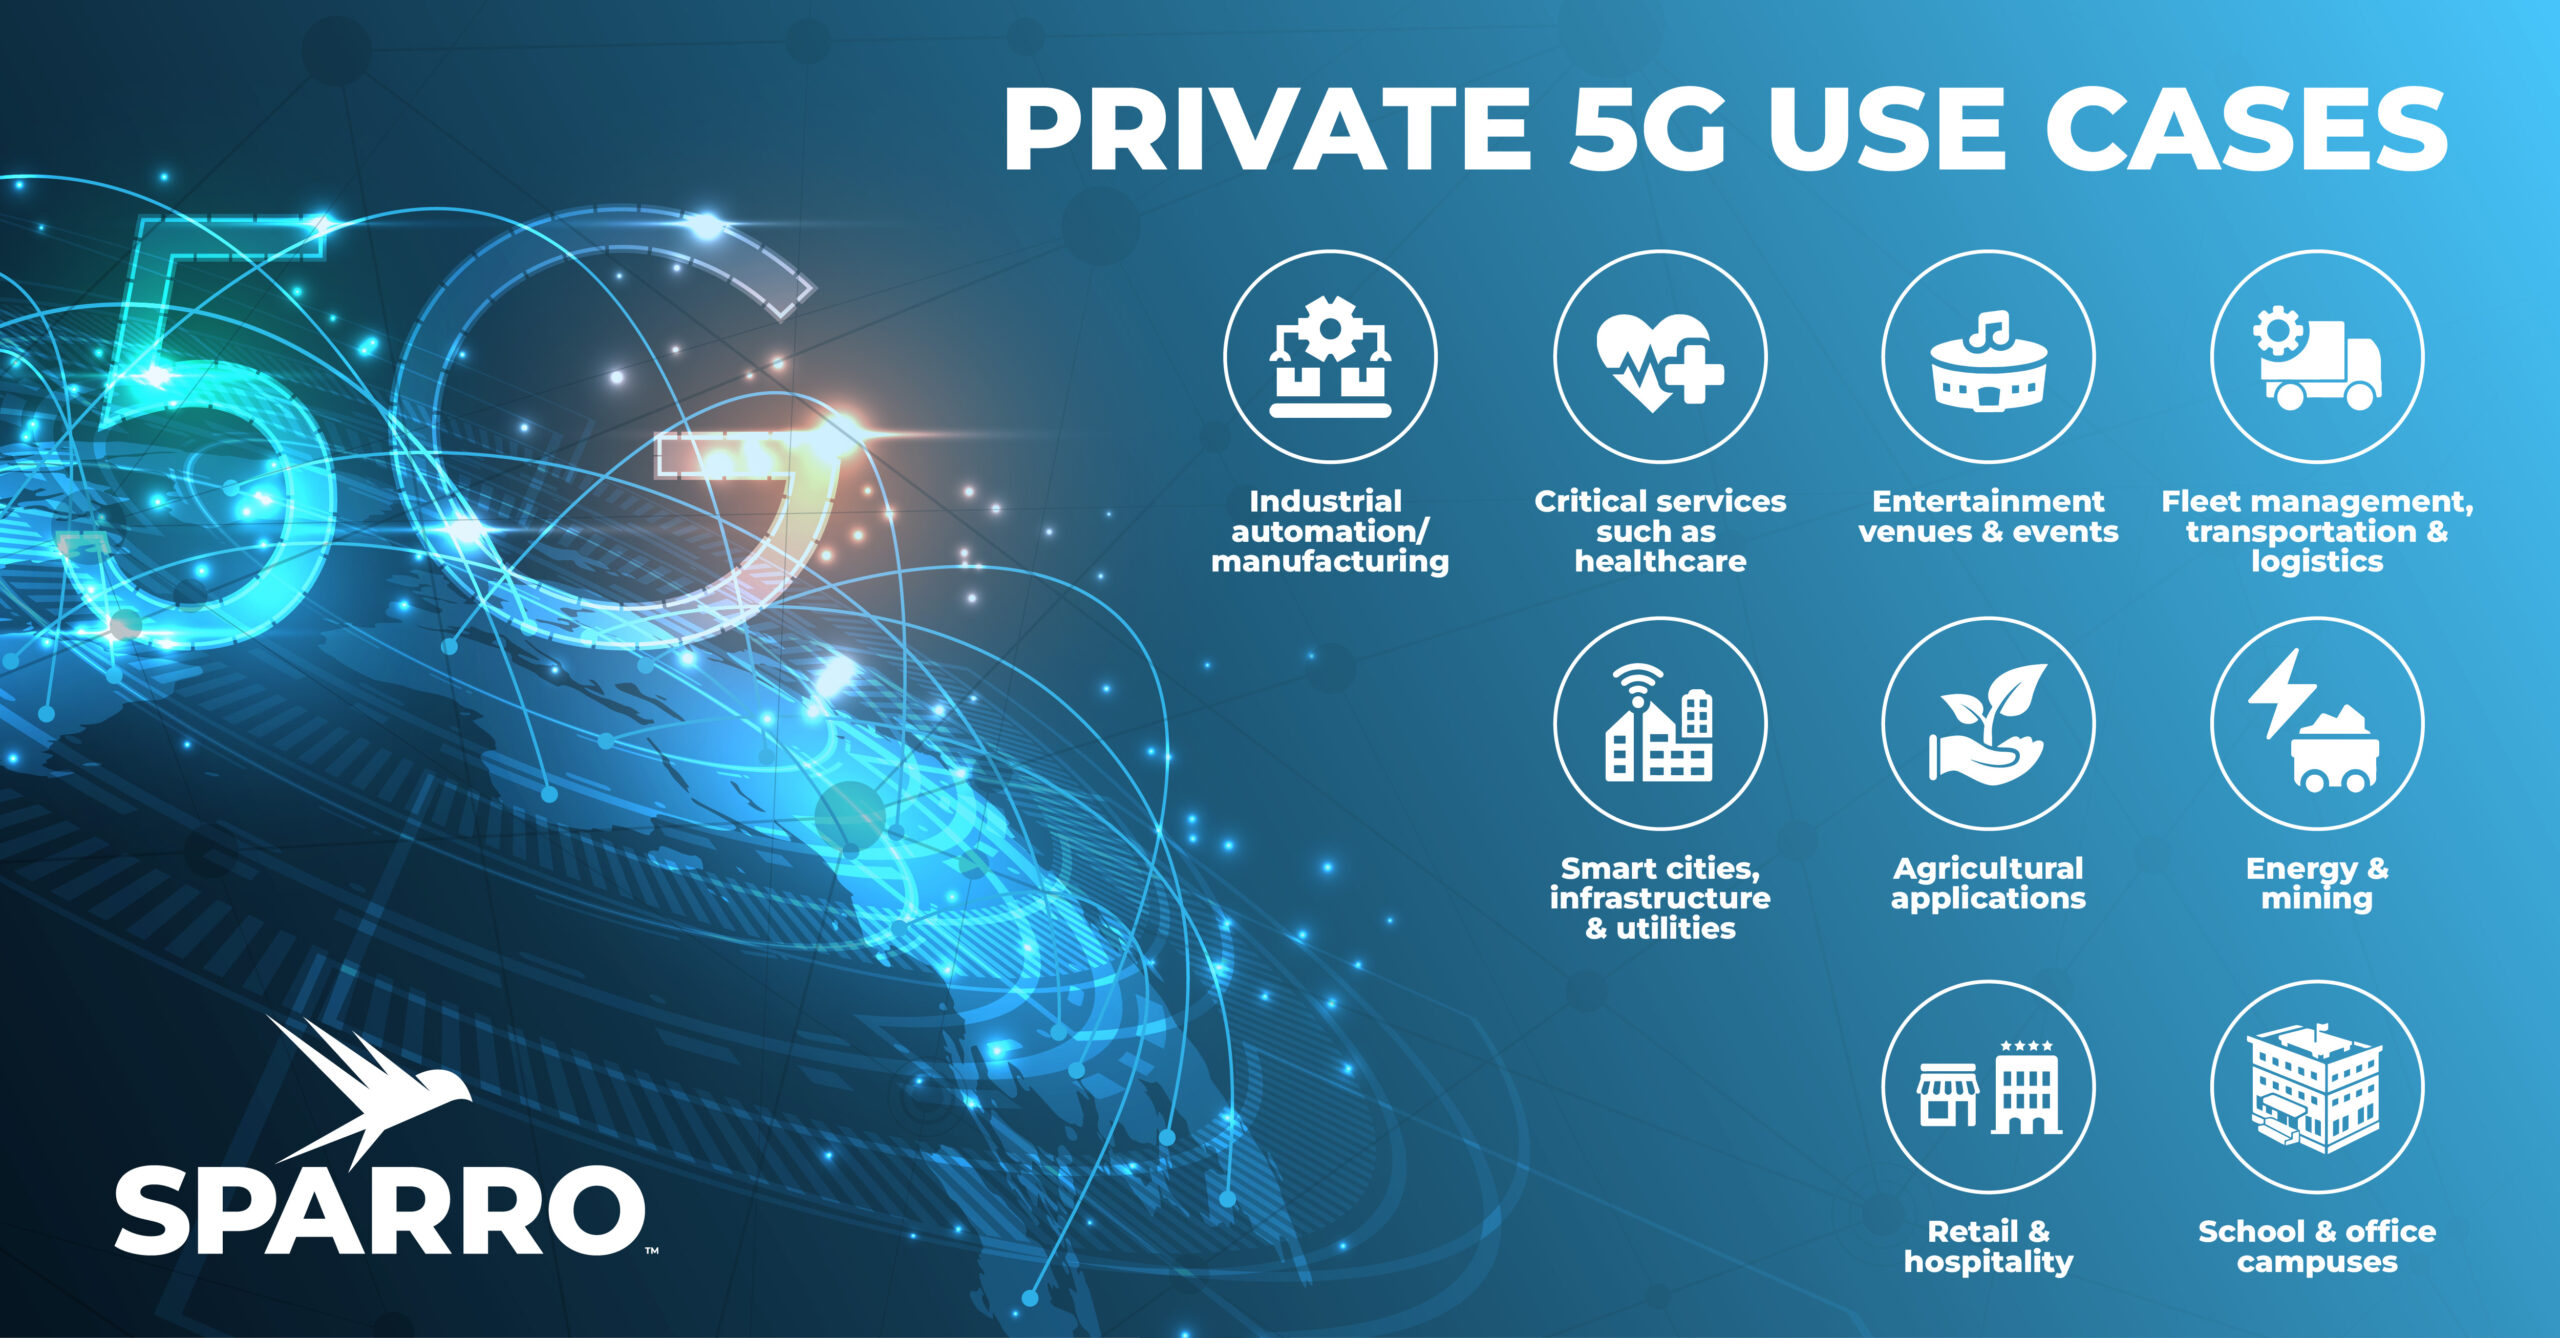 graphic with icons for private 5G use cases